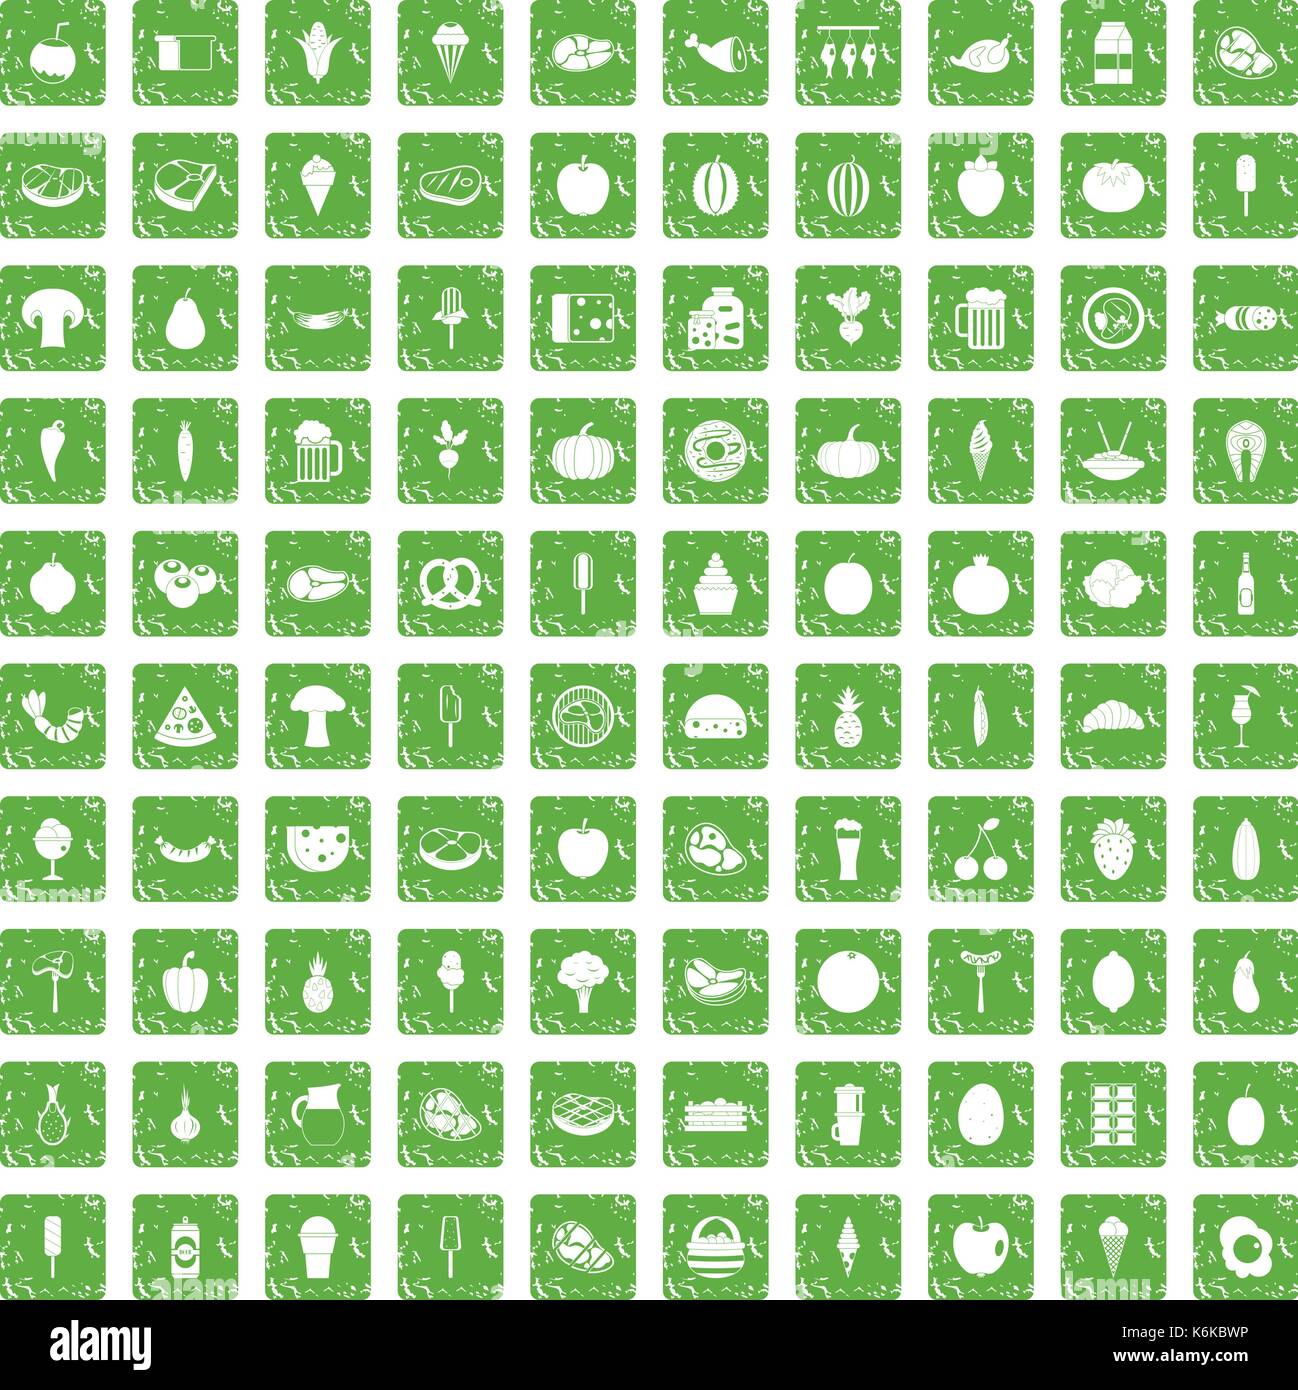 100 food icons set grunge green Stock Vector